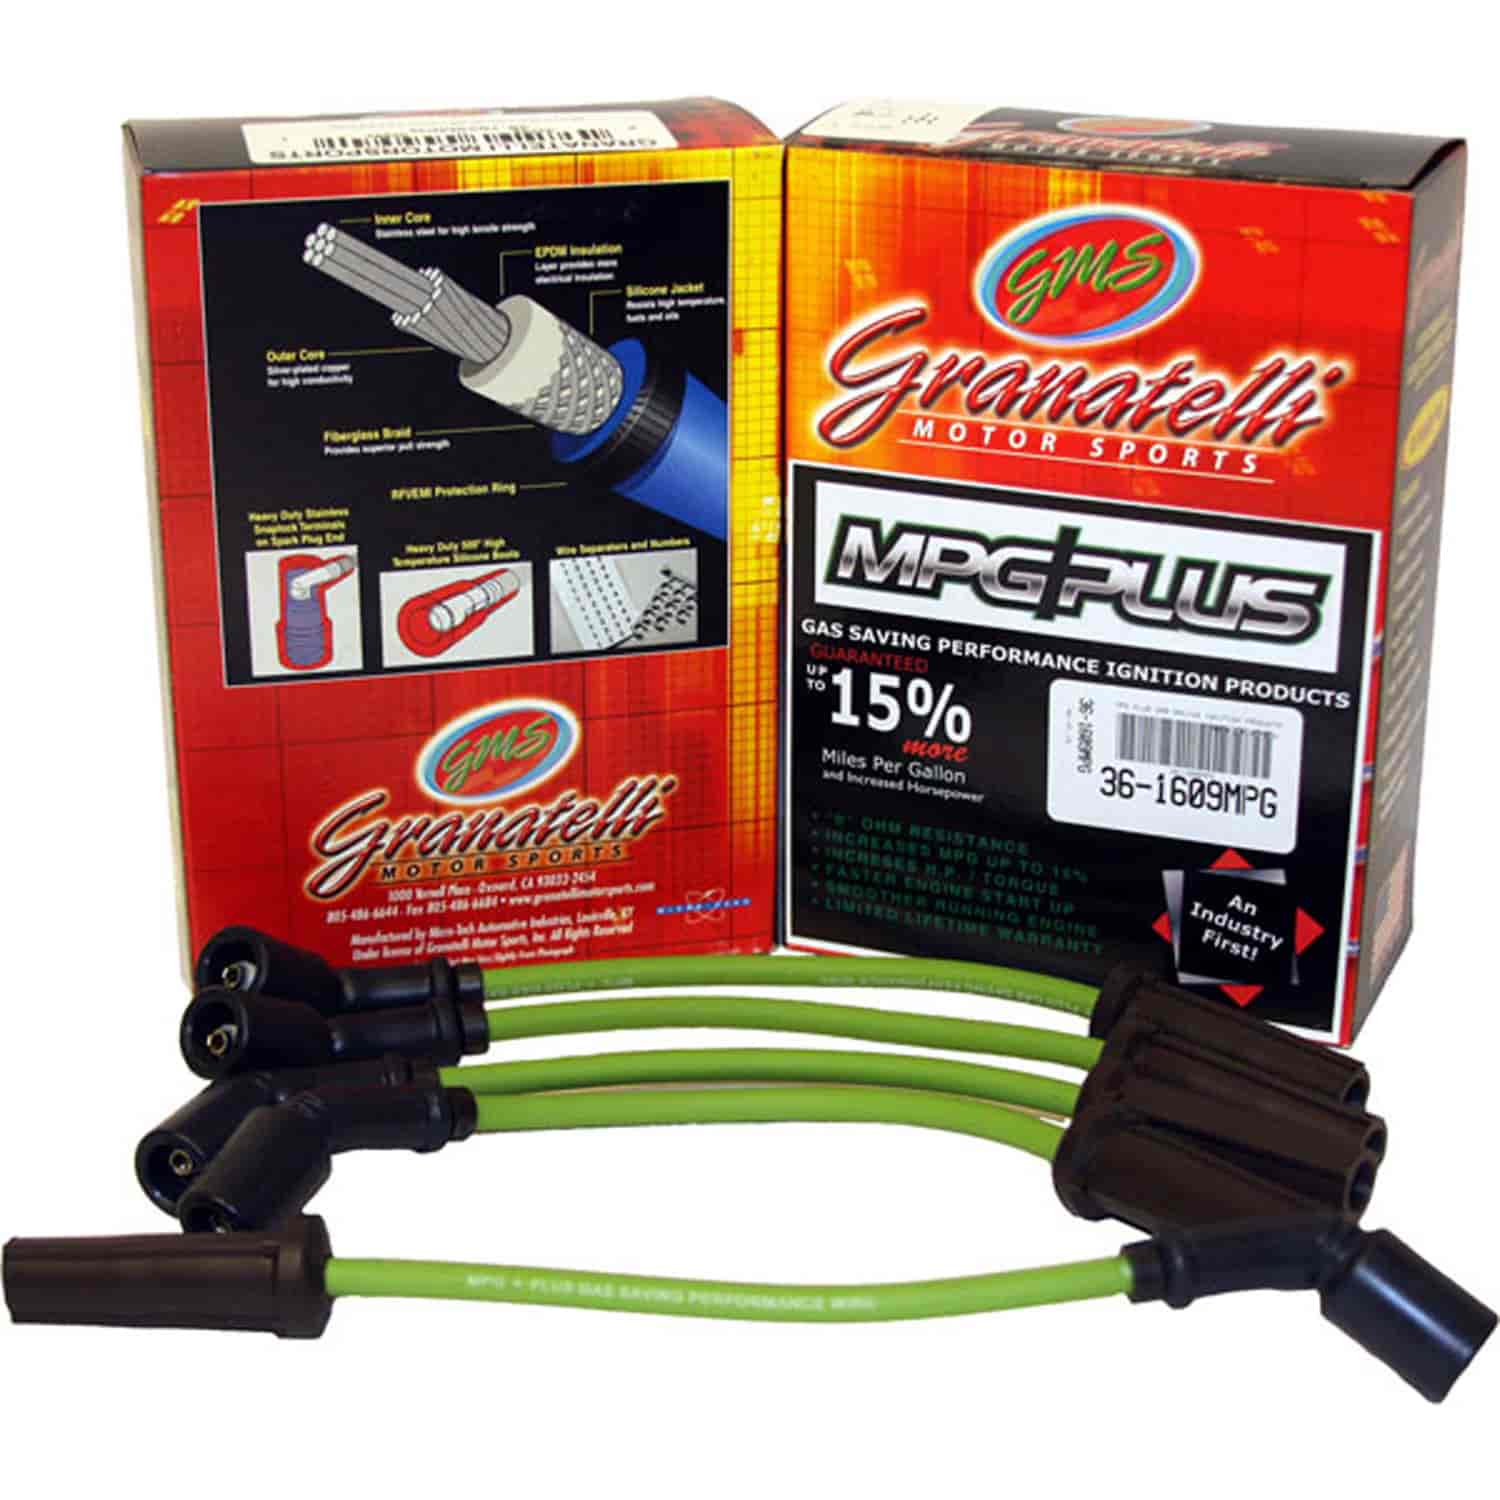 MPG Wires TOYOTA PASEO 4CYL 1.5L 91-95